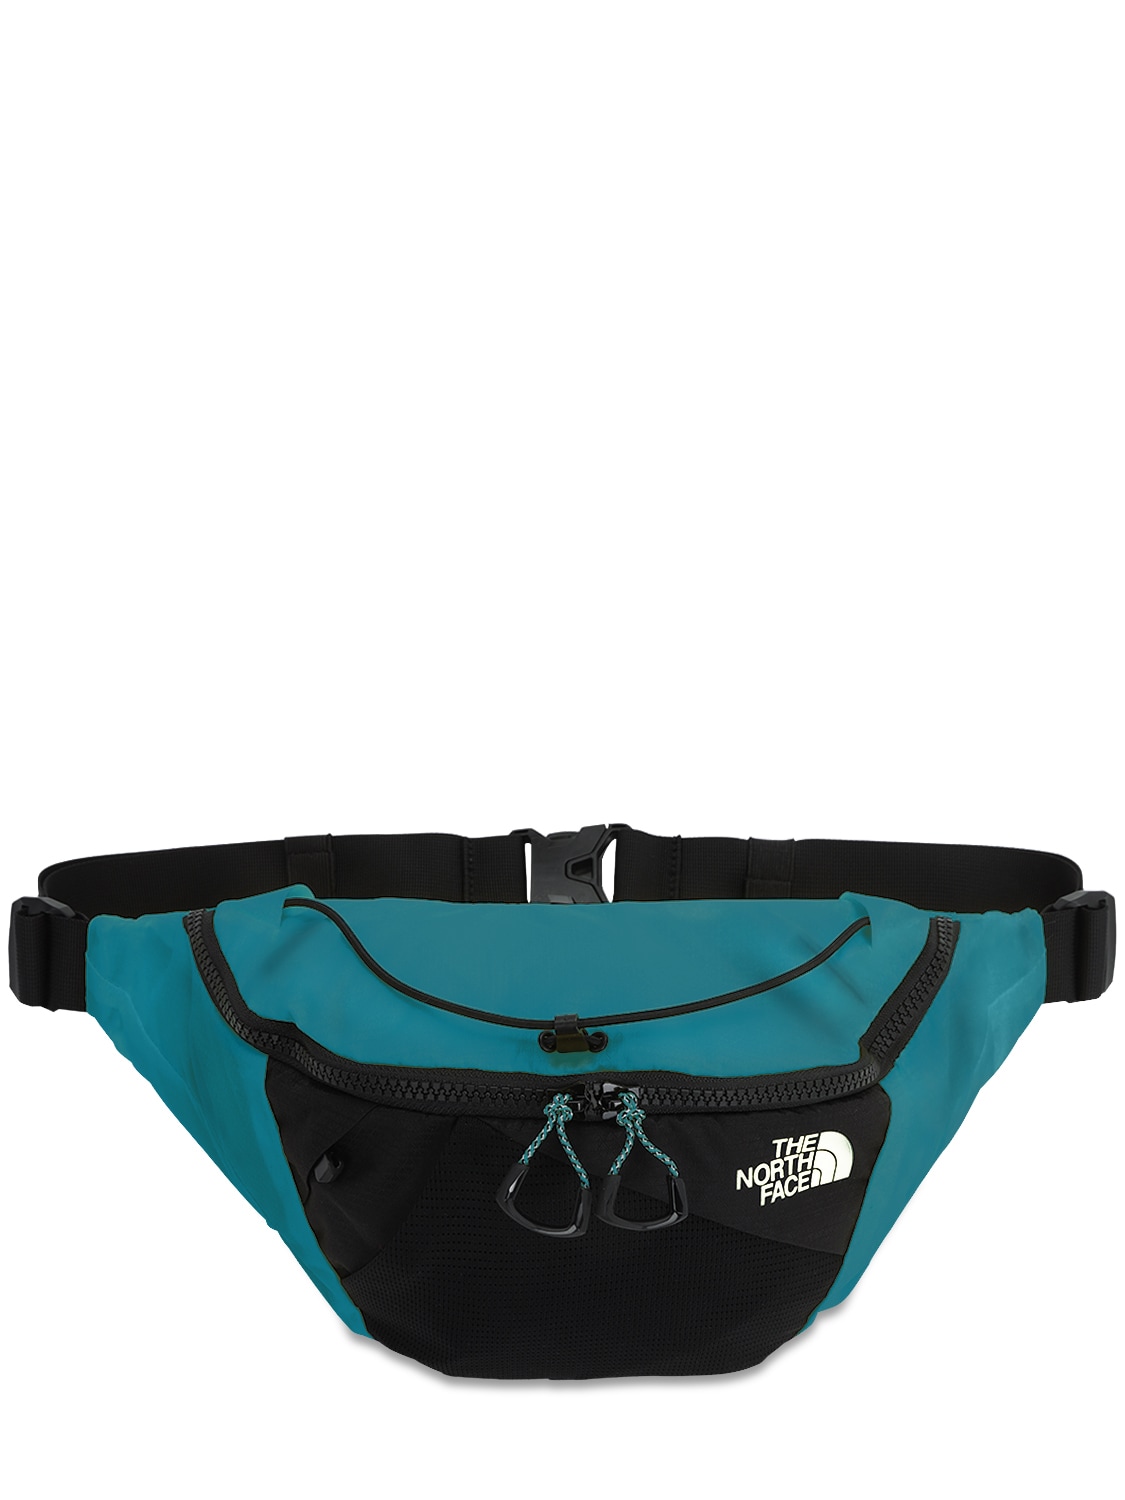 The North Face Lumbnical Belt Bag In Green,black